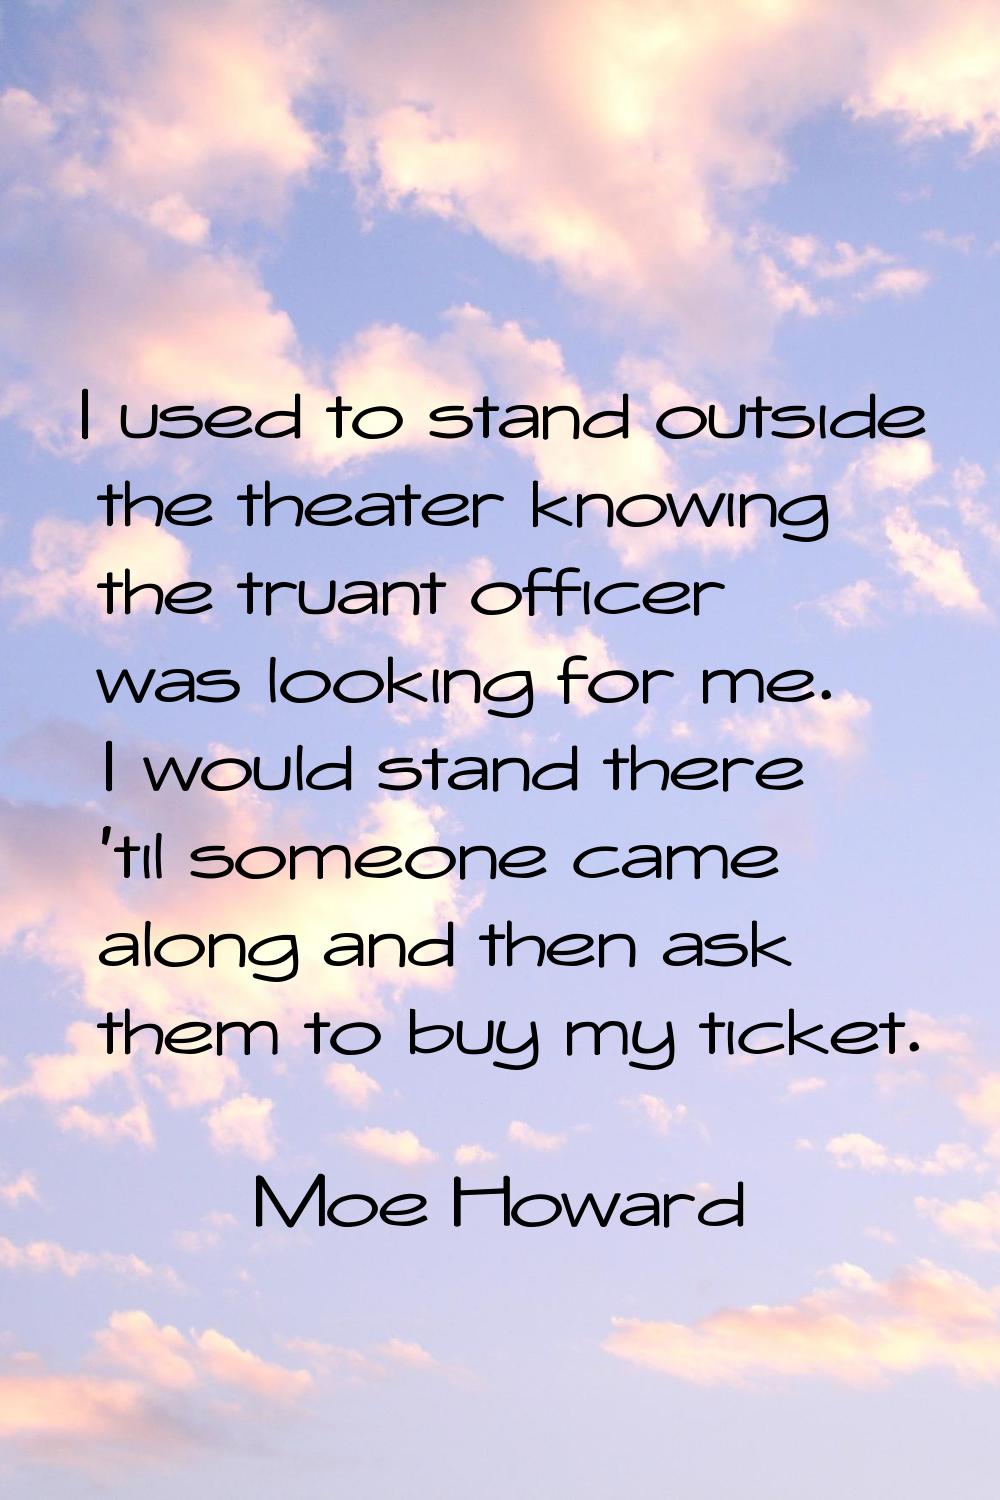 I used to stand outside the theater knowing the truant officer was looking for me. I would stand th